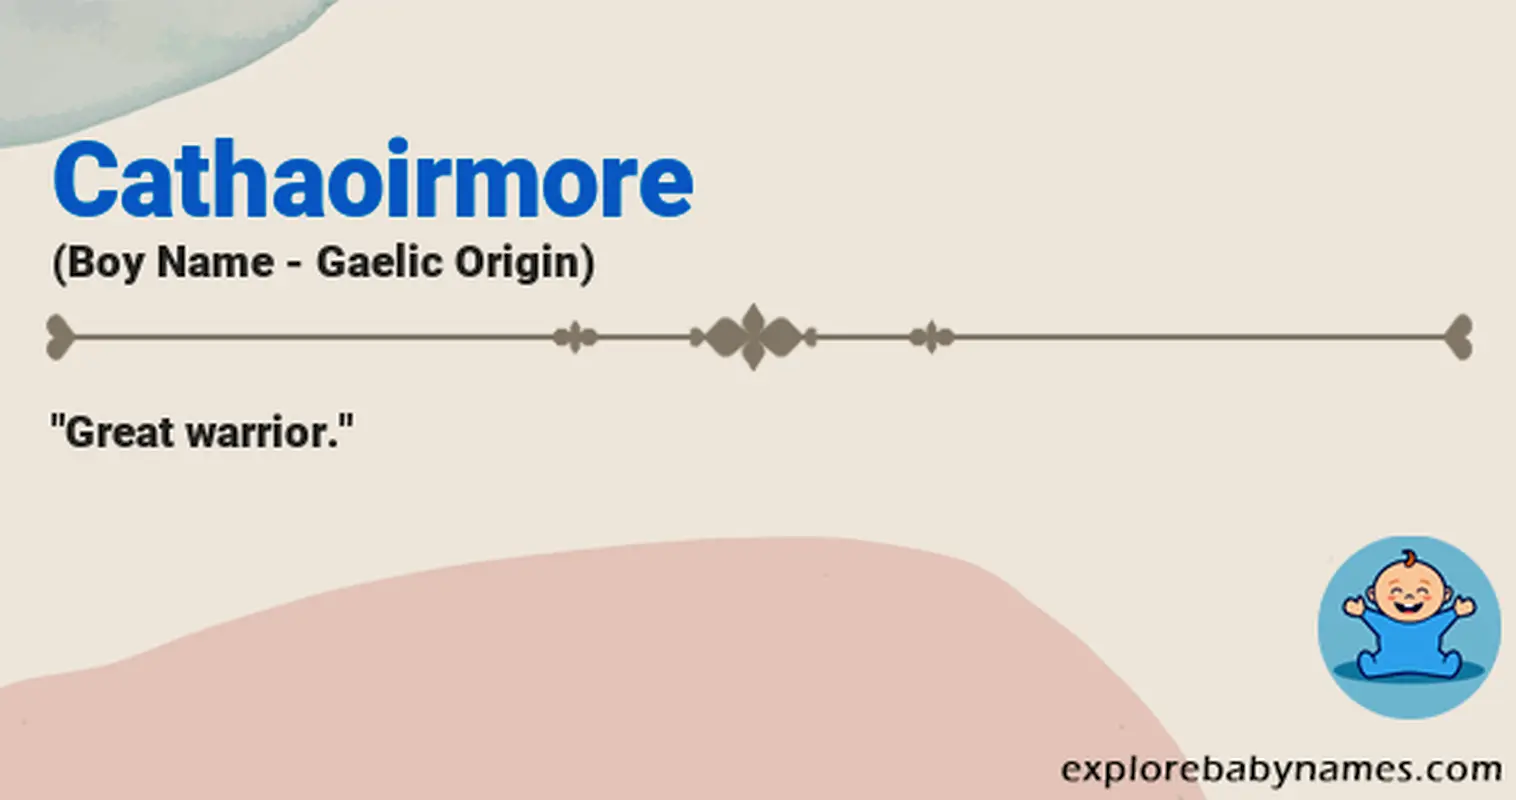 Meaning of Cathaoirmore